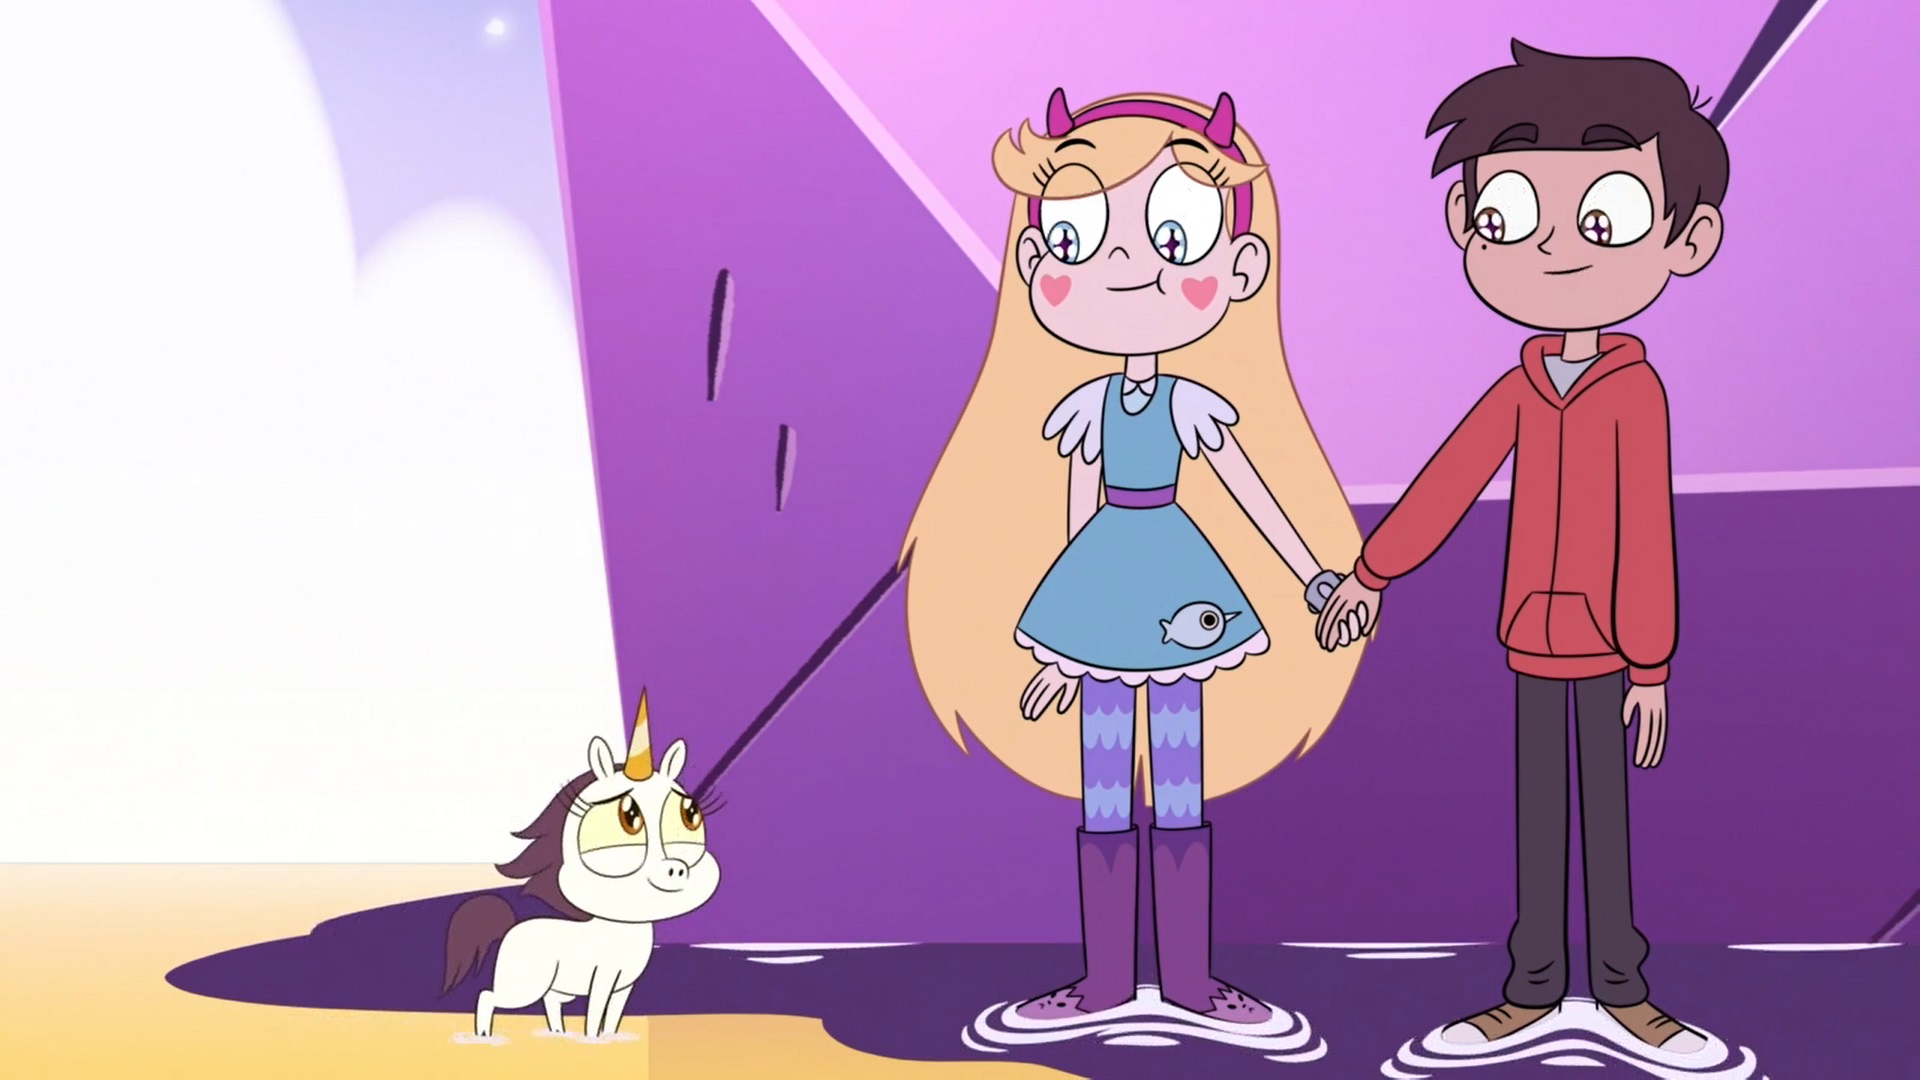 Star Vs The Forces Of Evil Aesthetic Sad.